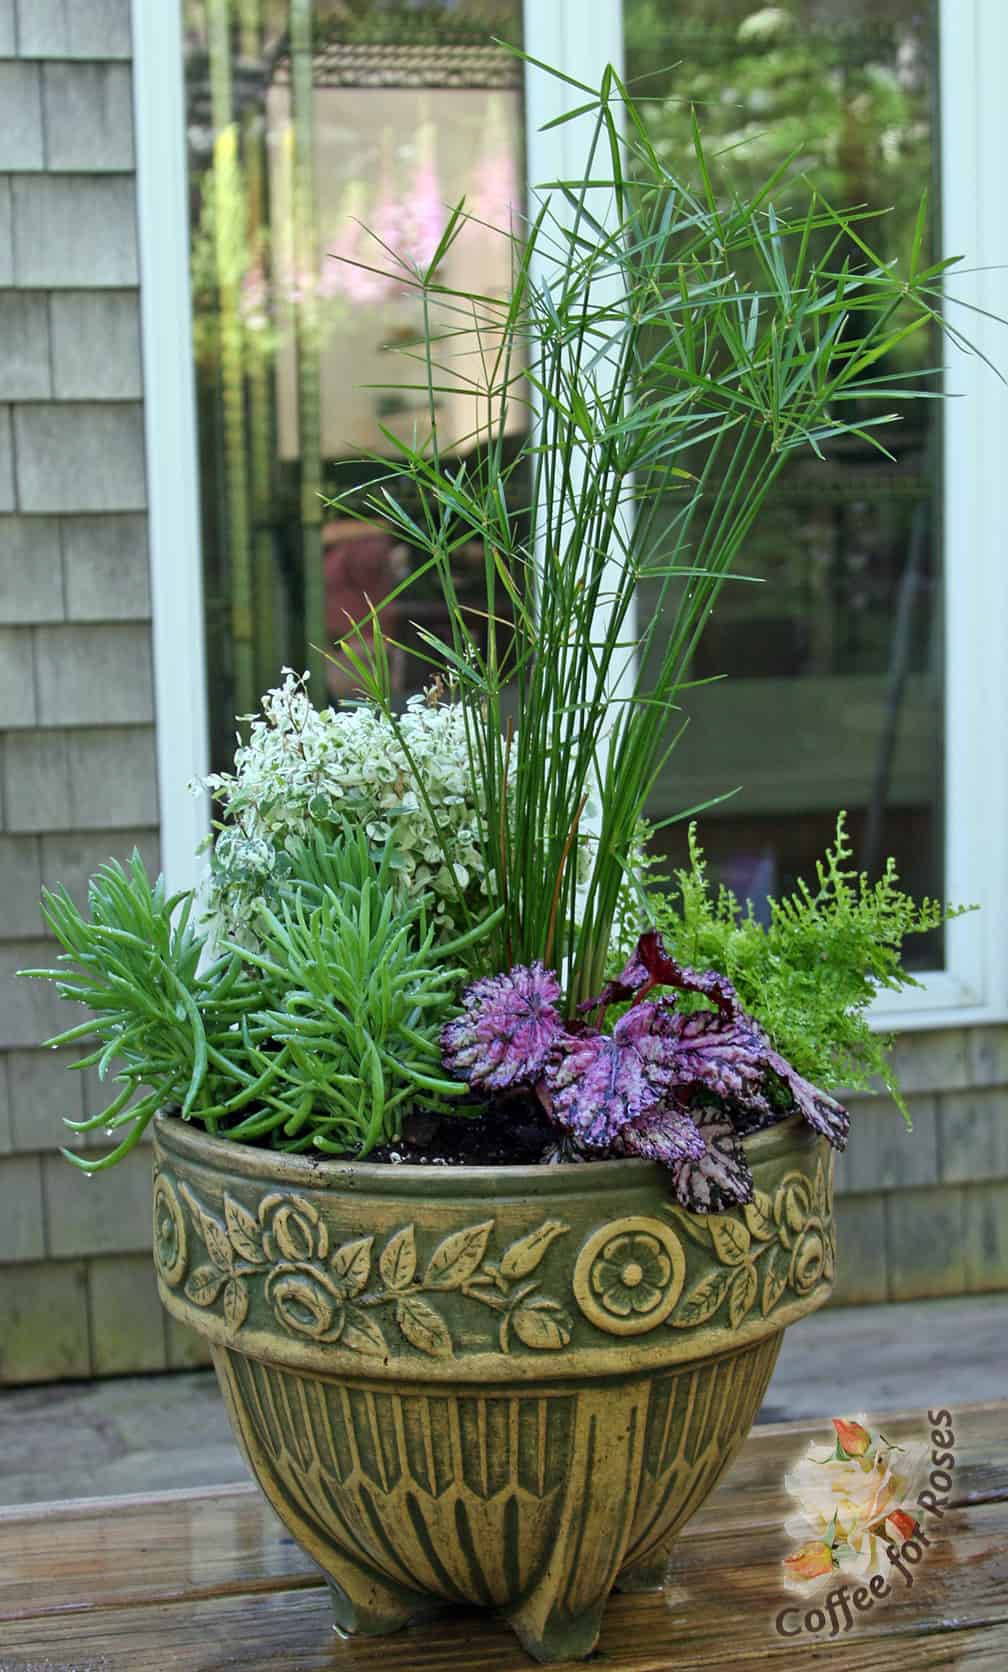 Here is how the pot looked with it was first planted. Although I had duplicates of some plants I grouped them all together so the container looked instantly full but each texture and leaf shape had it's own spot. Had I alternated them it would have looked more like a mish-mash and you wouldn't have seen any of the colors or textures clearly.